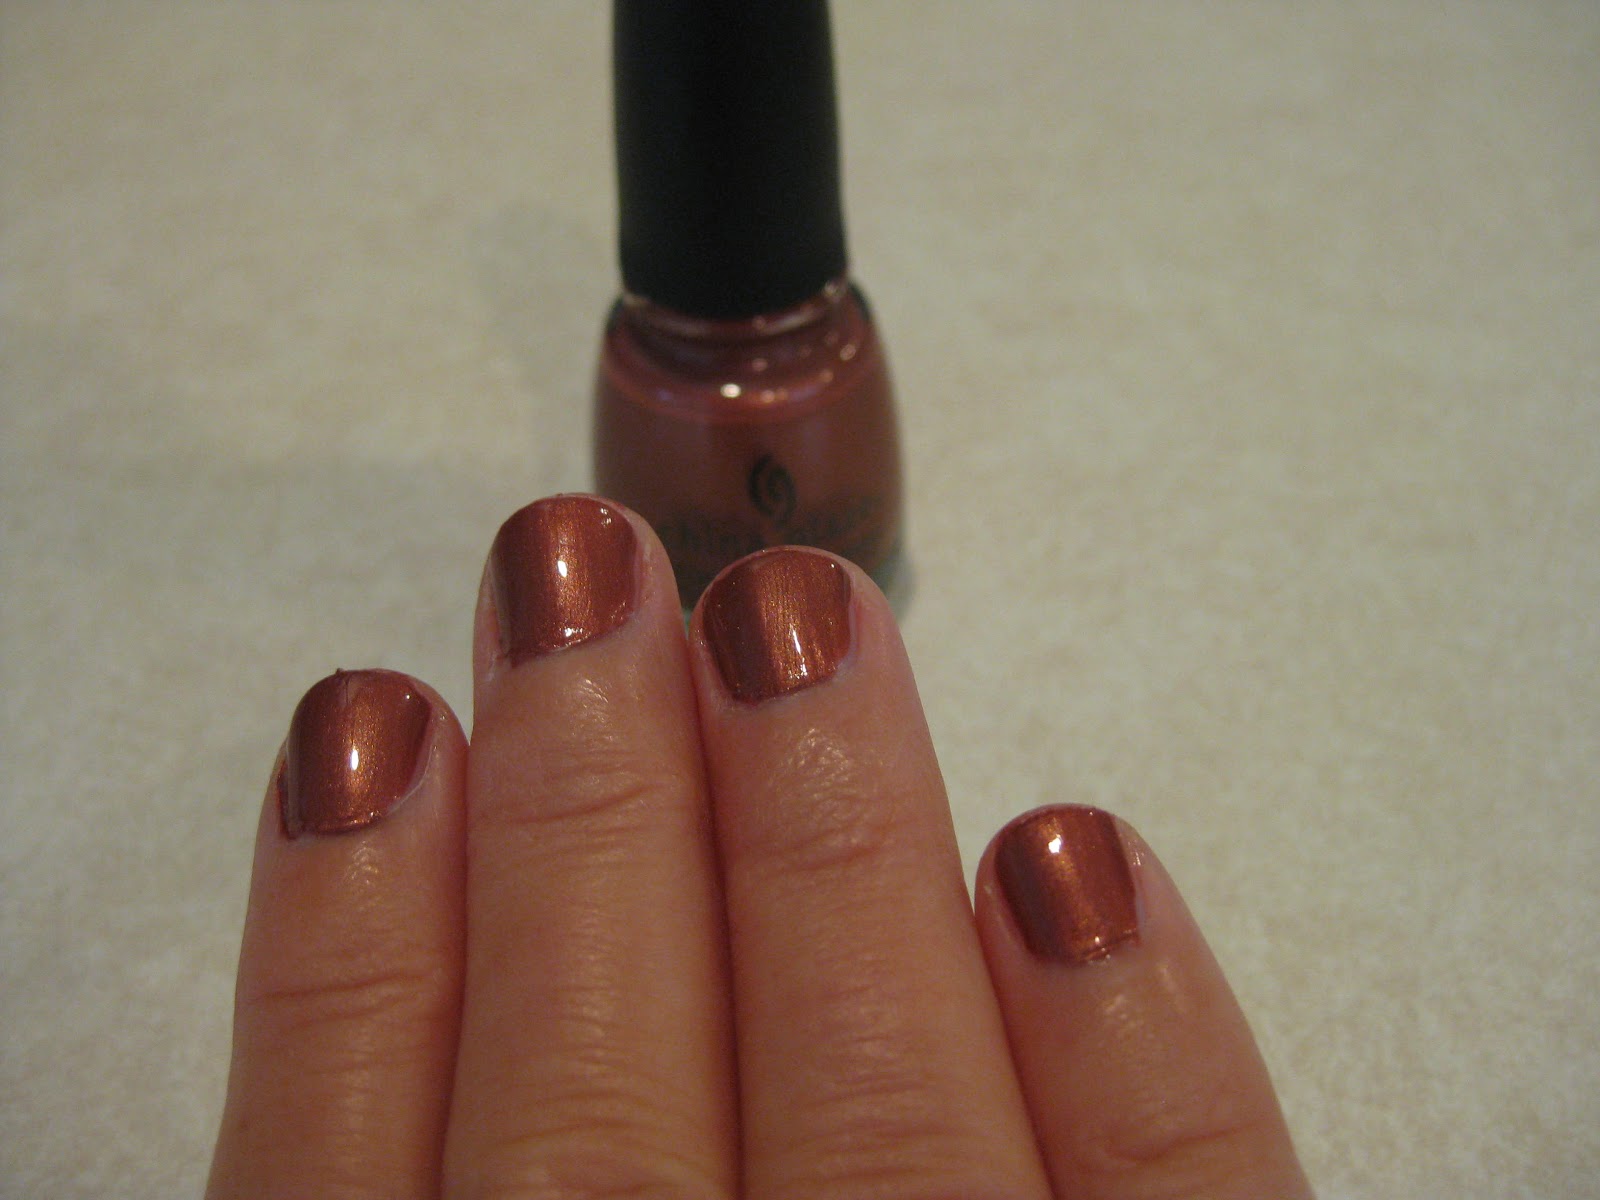 4. China Glaze Nail Lacquer in "That's Shore Bright" - wide 6